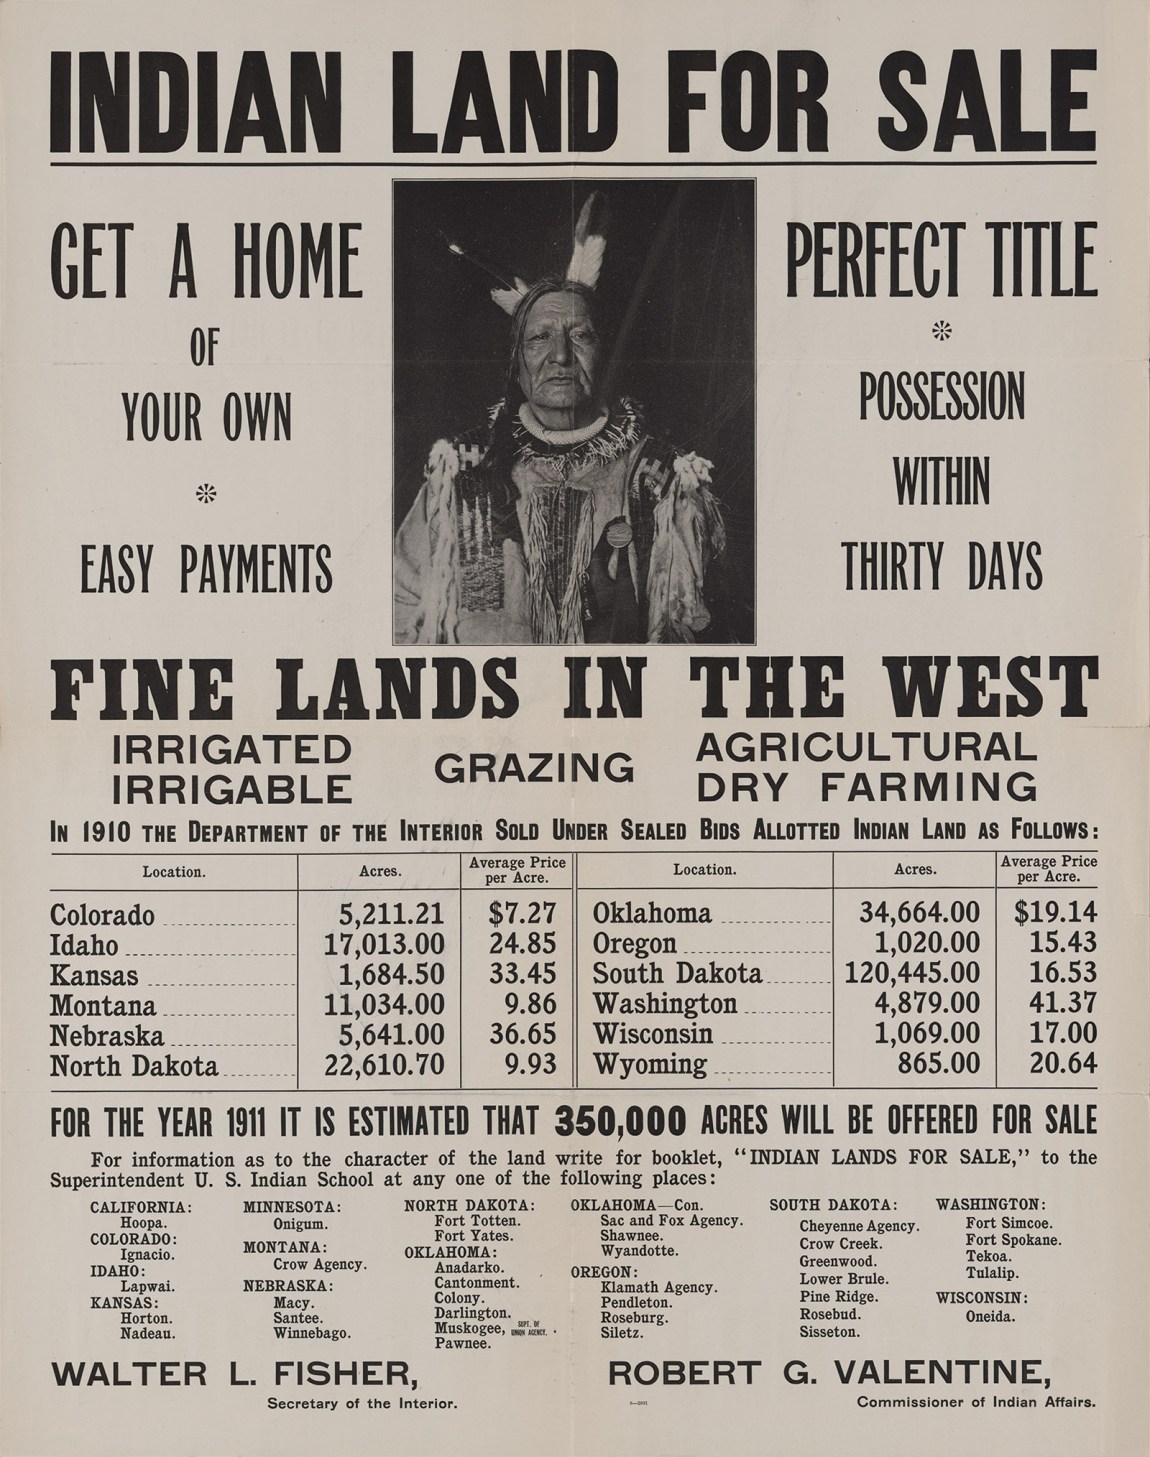 An advertisement for the sale of Indian land by the US Department of the Interior, 1911